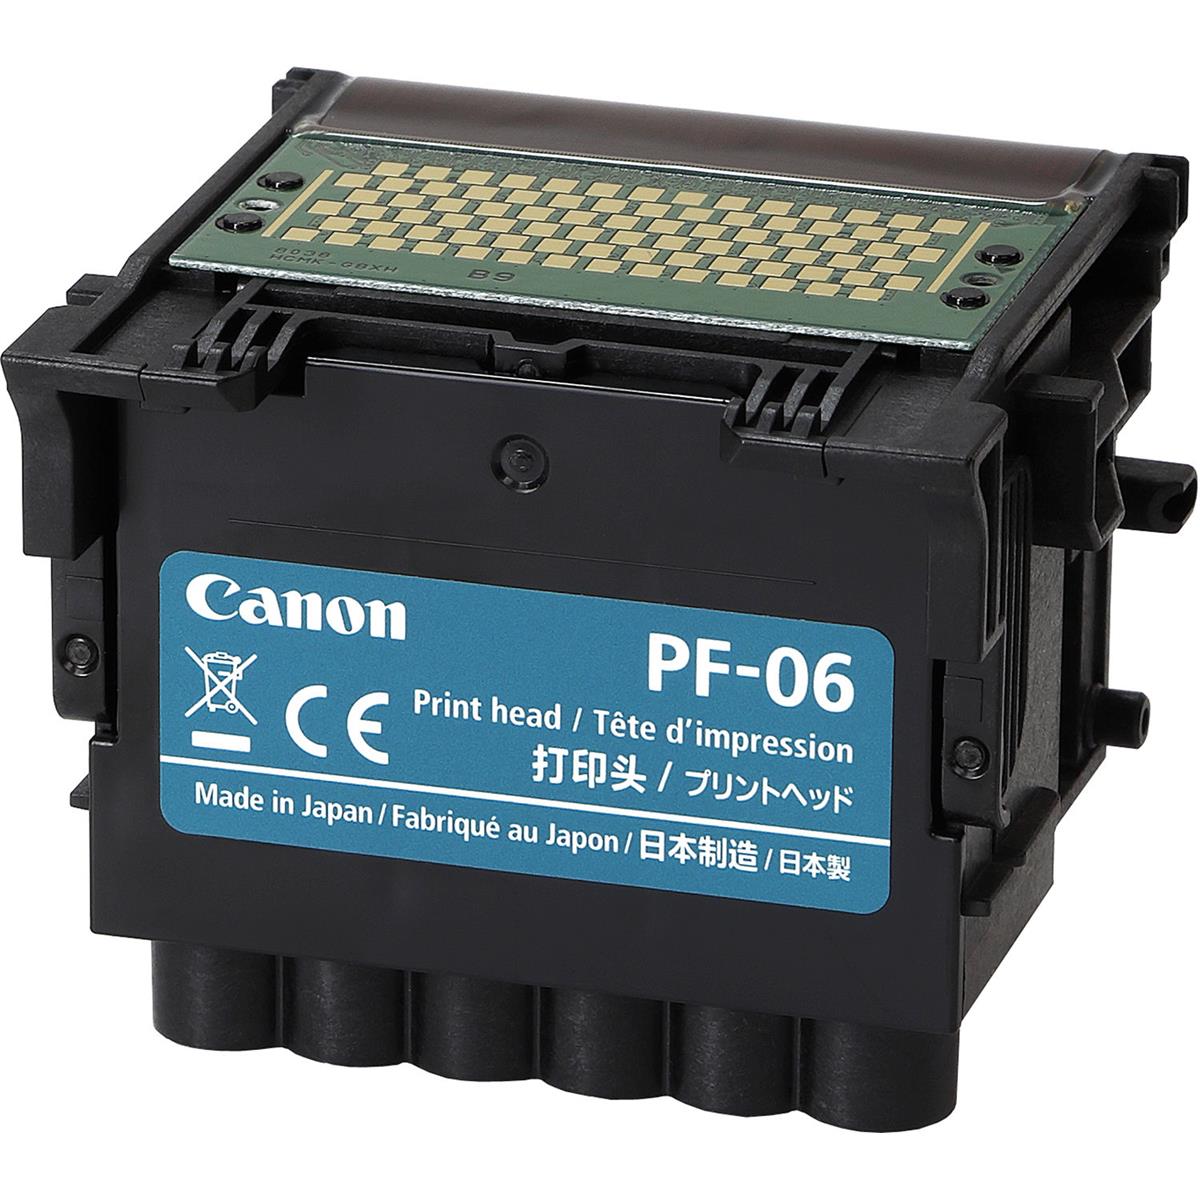 Photos - Printer Part Canon PF-06 Print Head for imagePROGRAF PRO and TX Series Wide Format Prin 